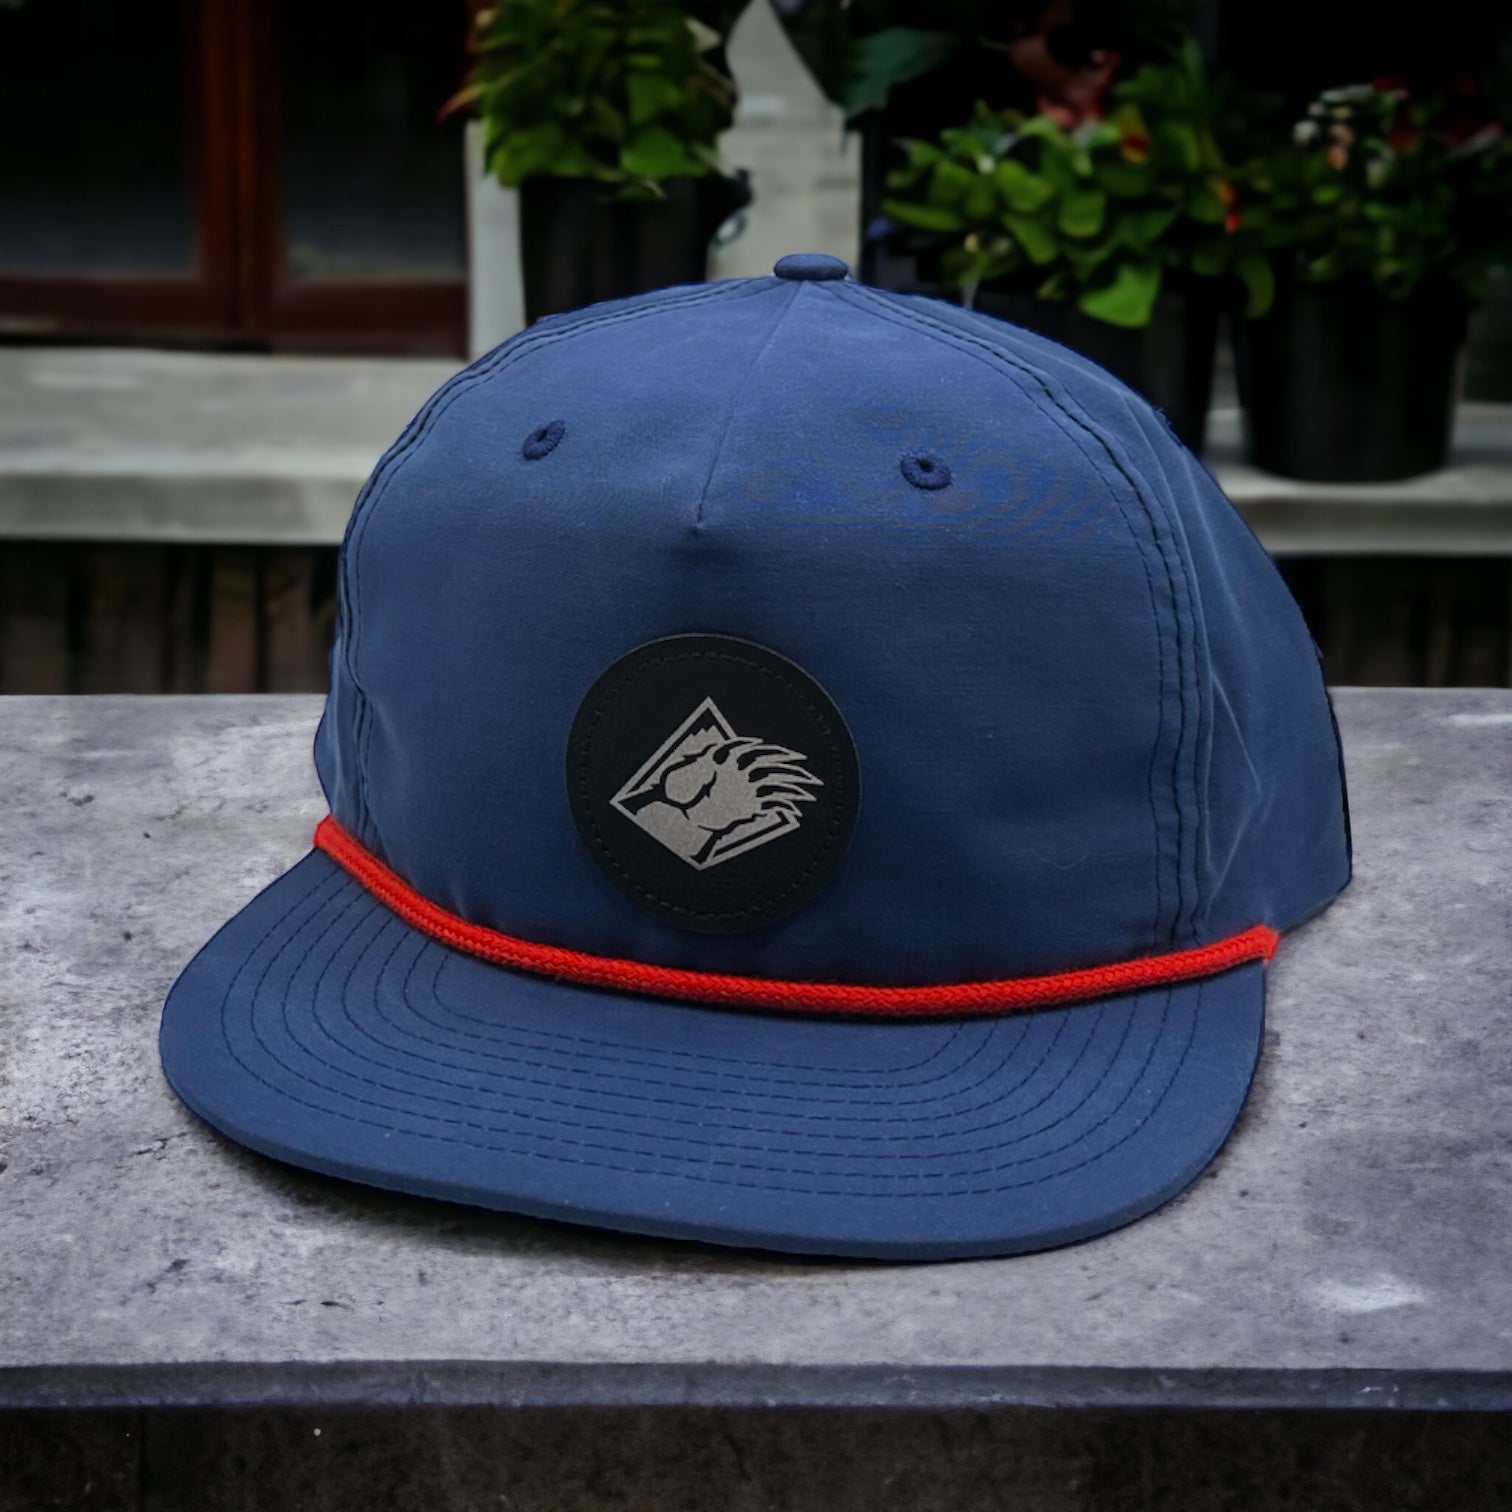 Blue hat with Bear claw logo and red rope on mid crown.